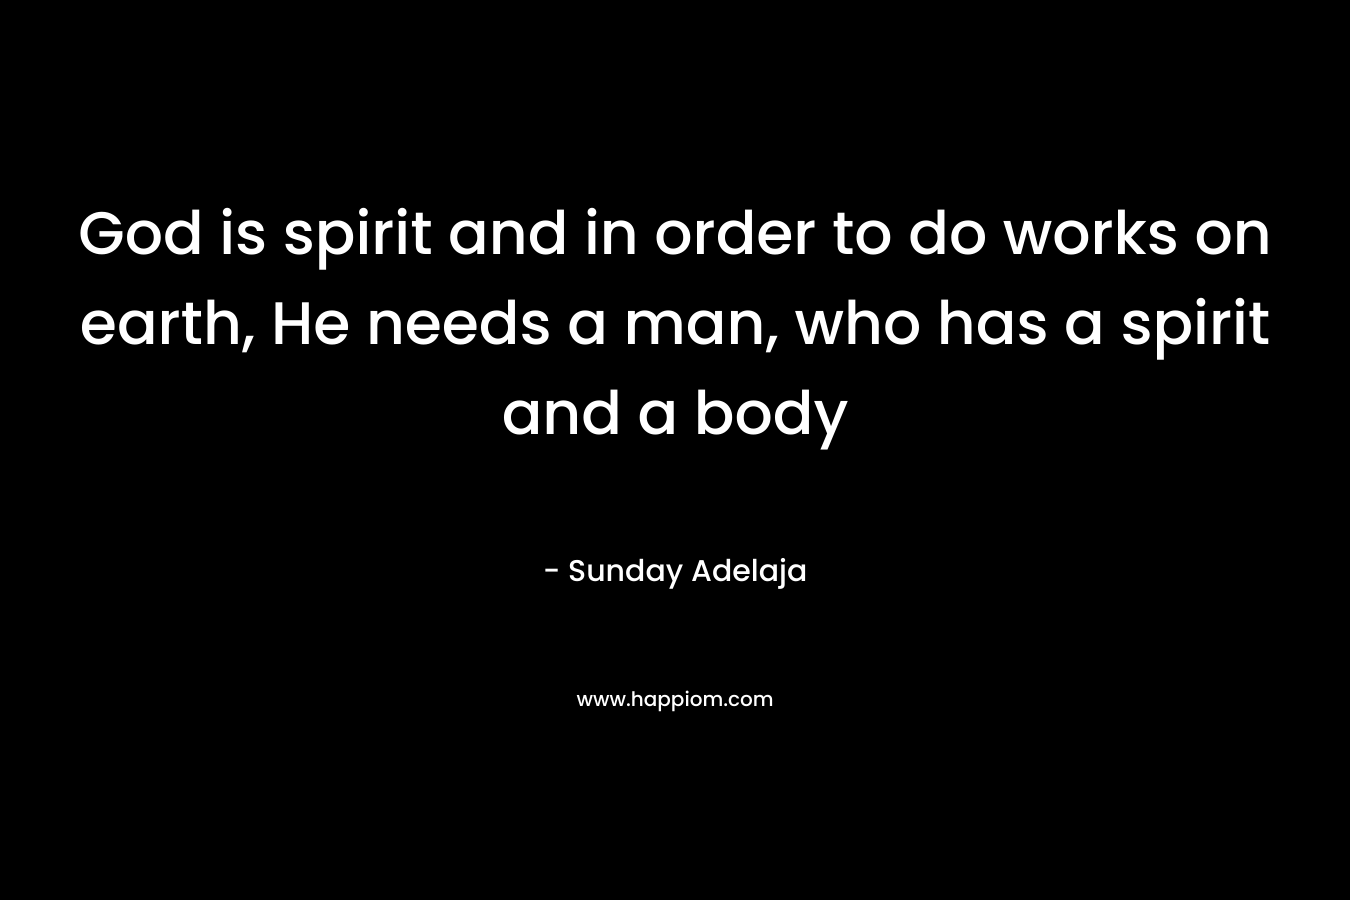 God is spirit and in order to do works on earth, He needs a man, who has a spirit and a body